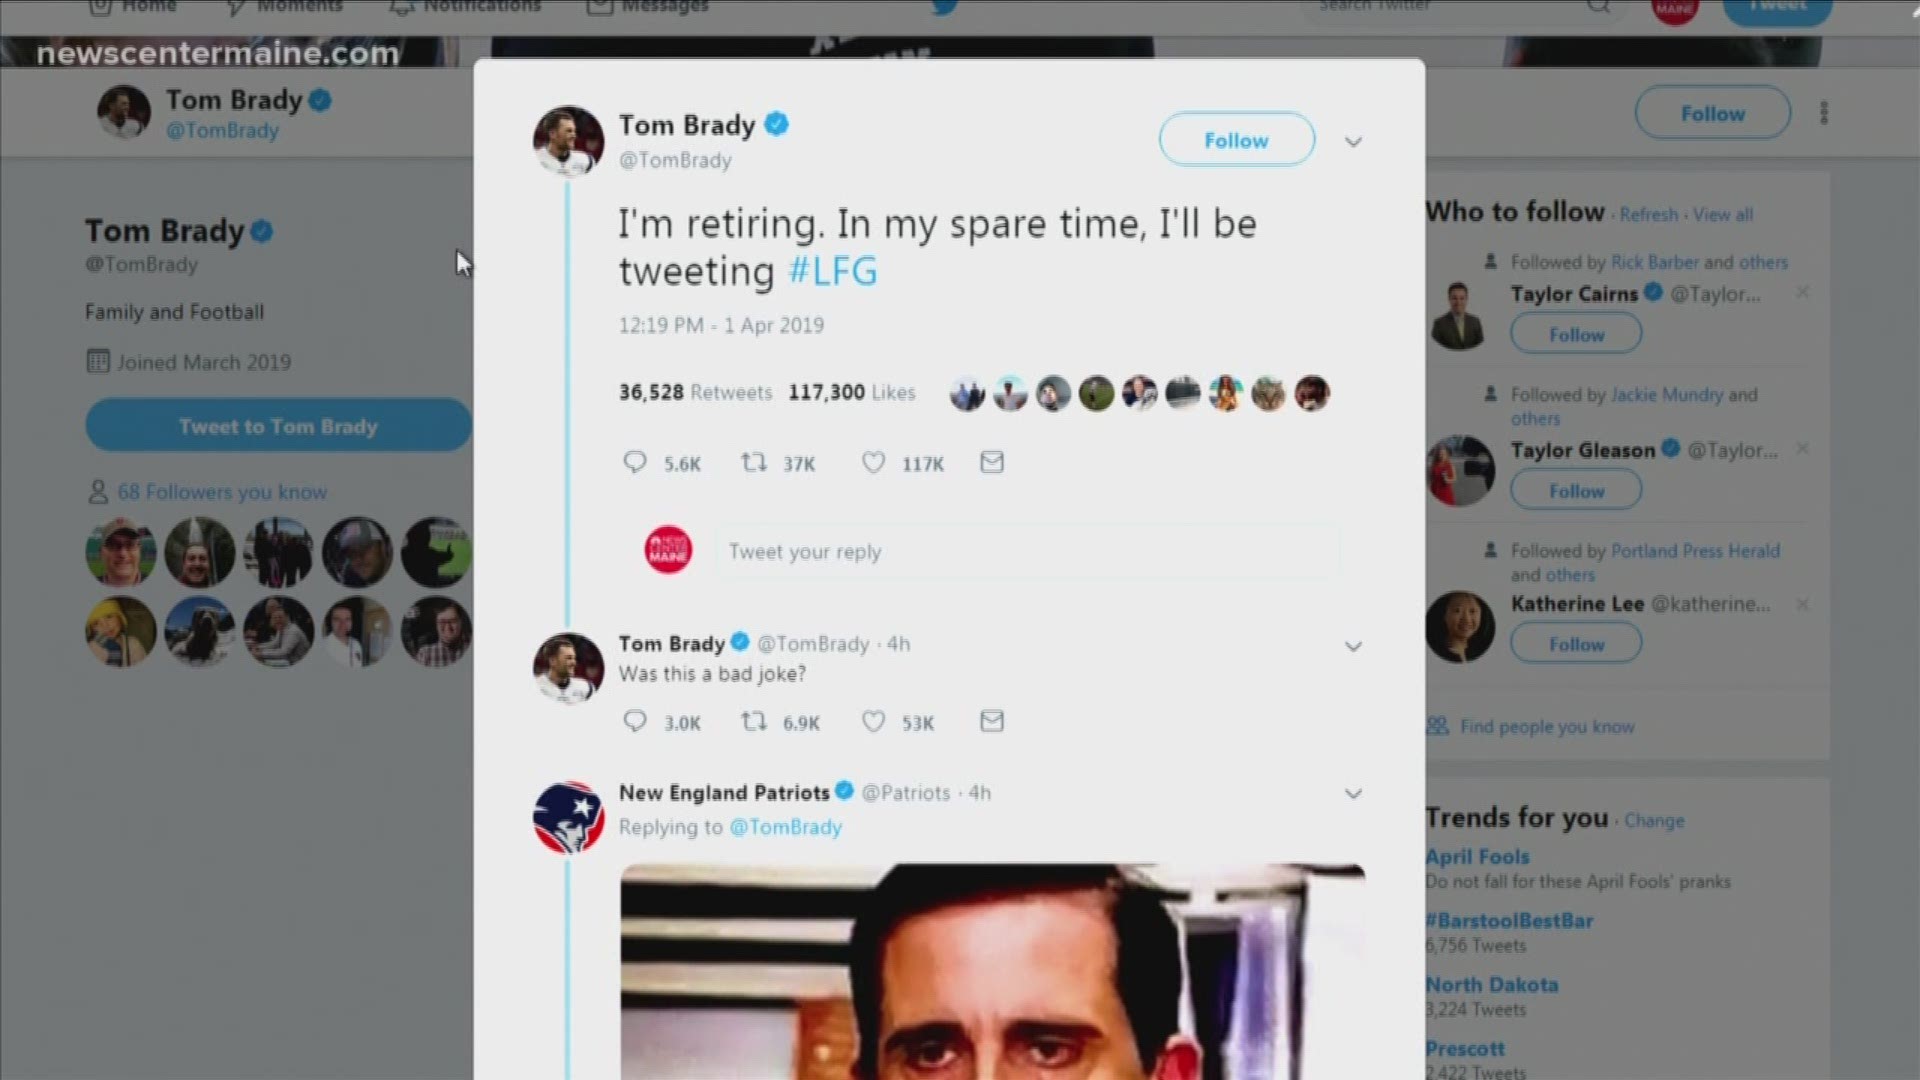 Tom Brady joins Twitter on April Fools' Day, says he's 'retiring'